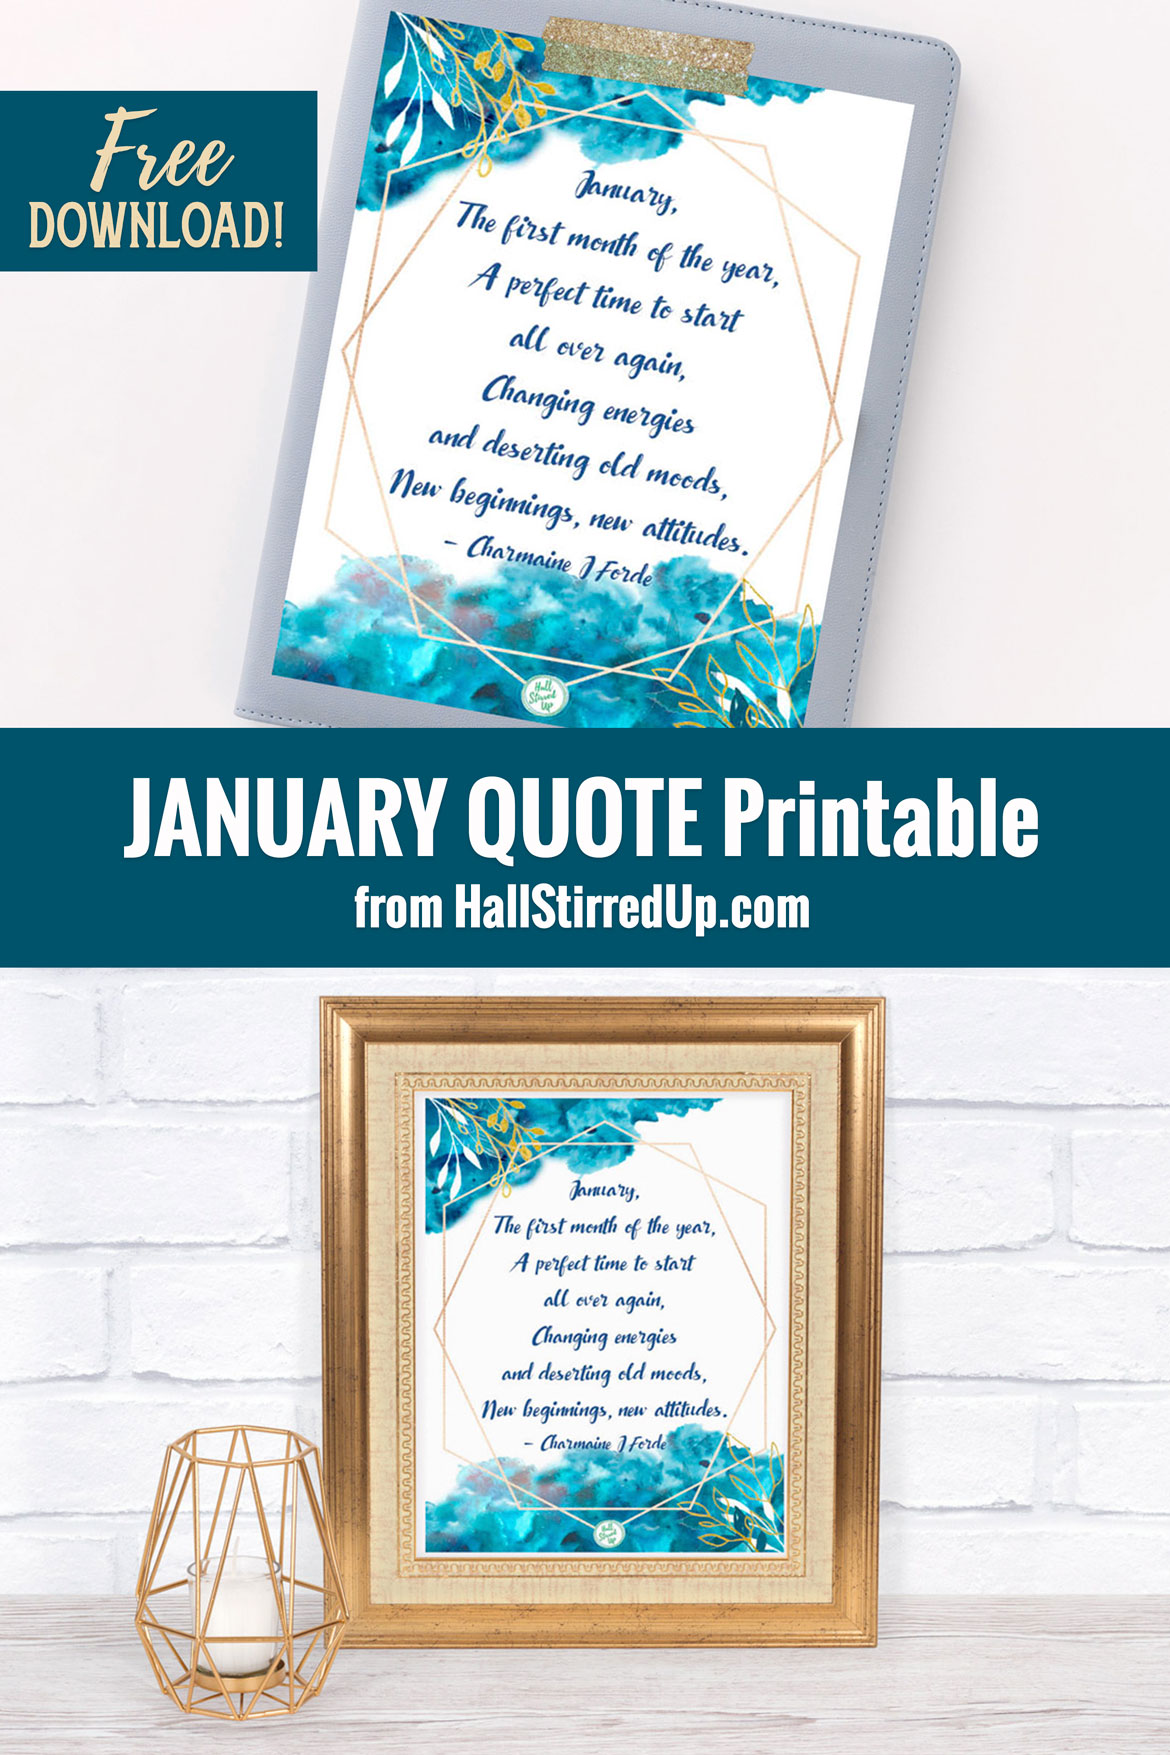 January is here and so is a new quote printable